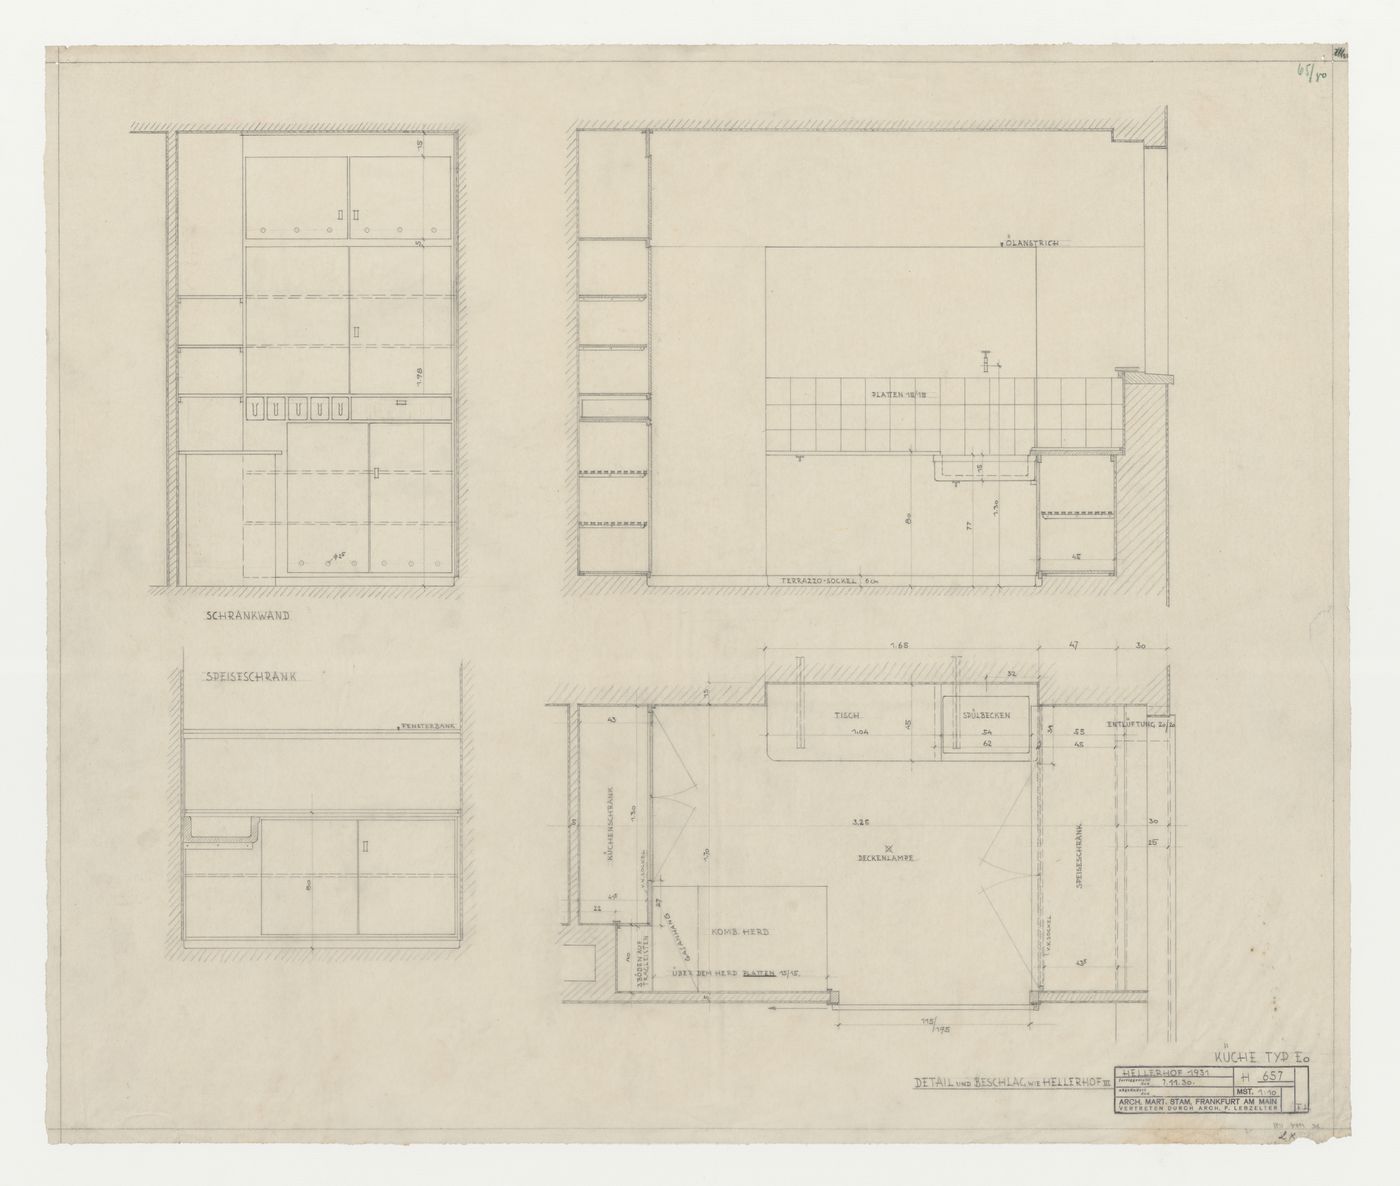 Plan and elevations for a type EO kitchen for housing unit, Hellerhof Housing Estate, Frankfurt am Main, Germany